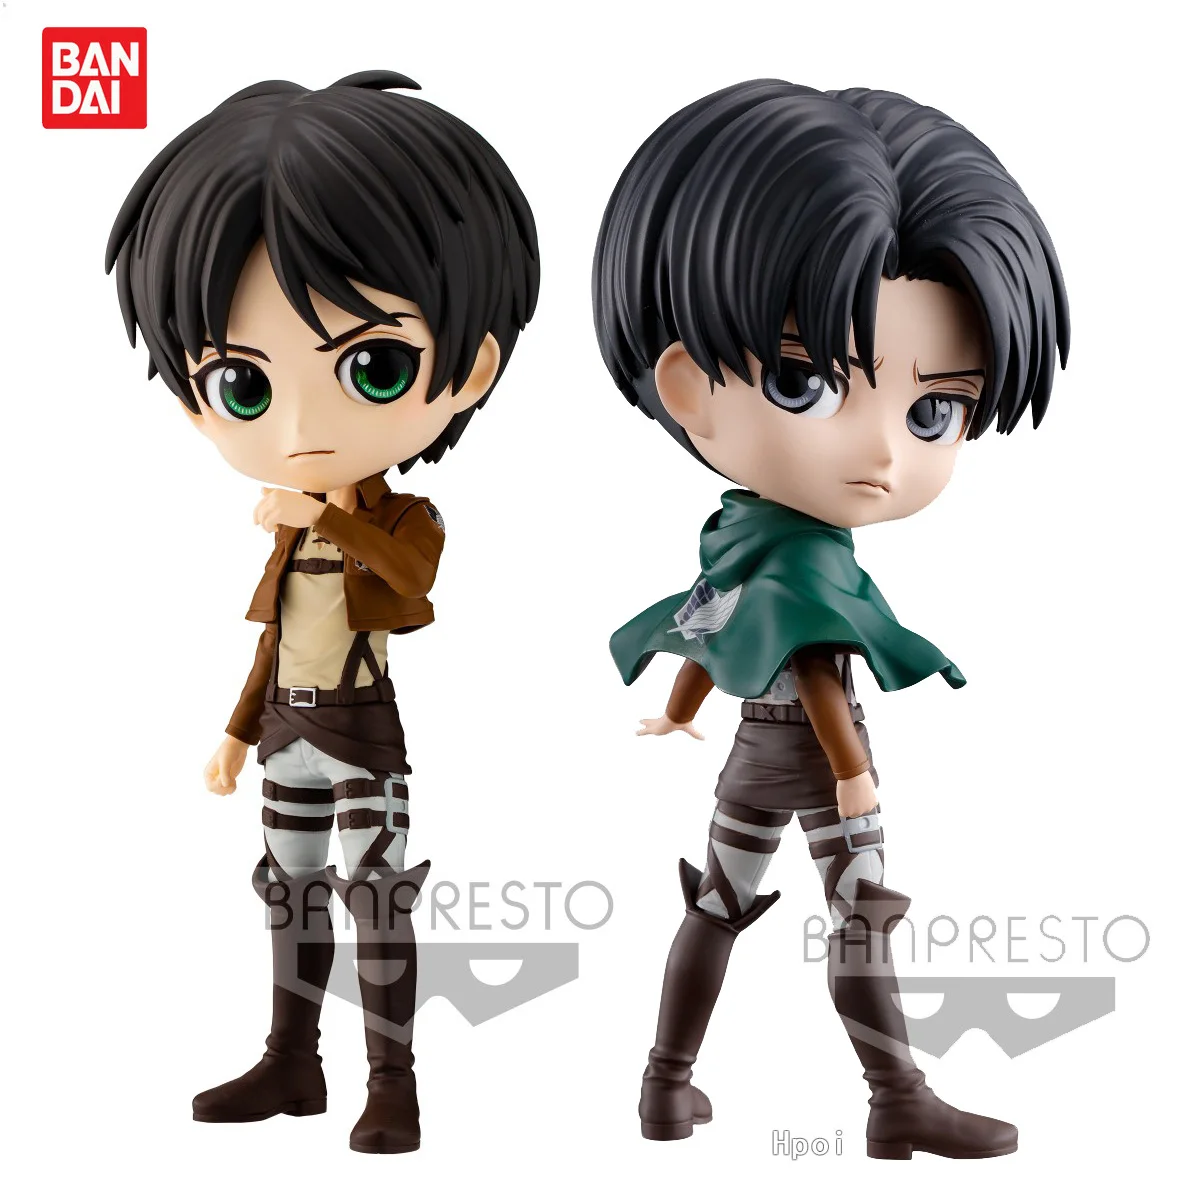 

Anime Figure Attack On Titan Levi Ackerman Eren Yeager Action Figures Q Version Hand Made Toys Kawaii Model Ornaments Gifts